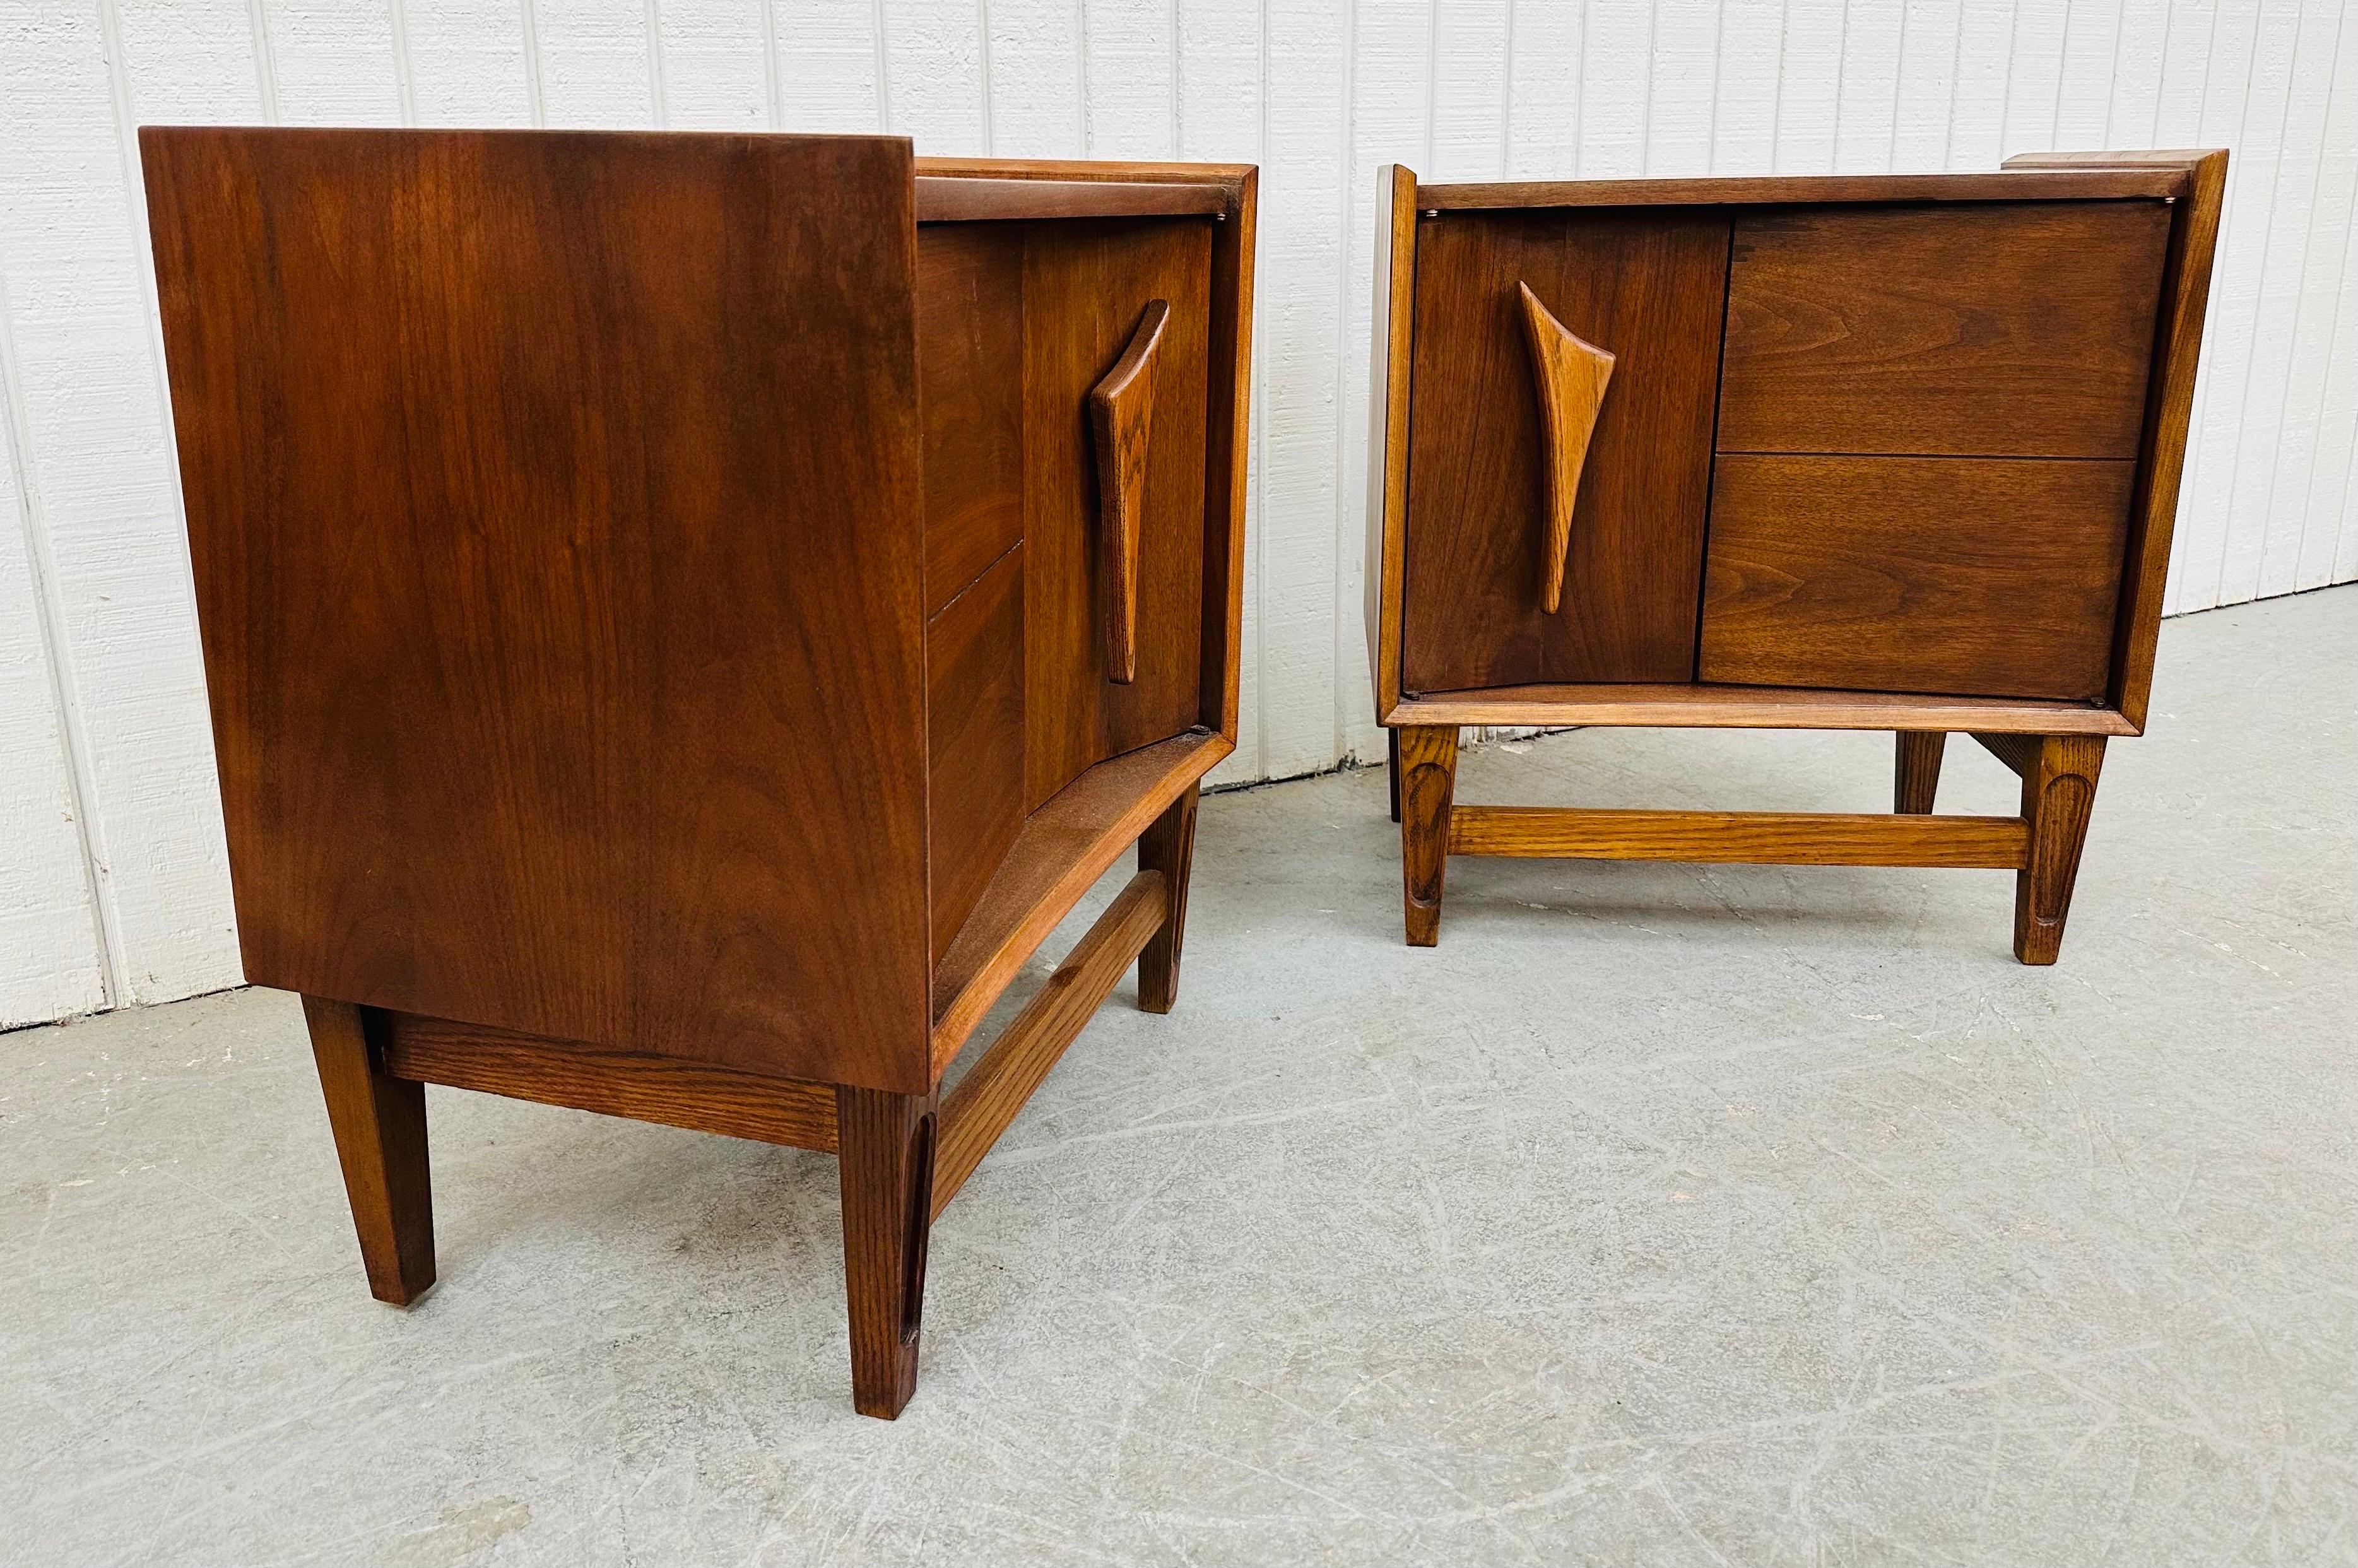 This listing is for a pair of Mid-Century Modern Kagan Style Walnut Nightstands. Featuring a straight line design, two doors that open up to storage space, modern legs with stretcher base, and sculpted wooden pulls. This is an exceptional